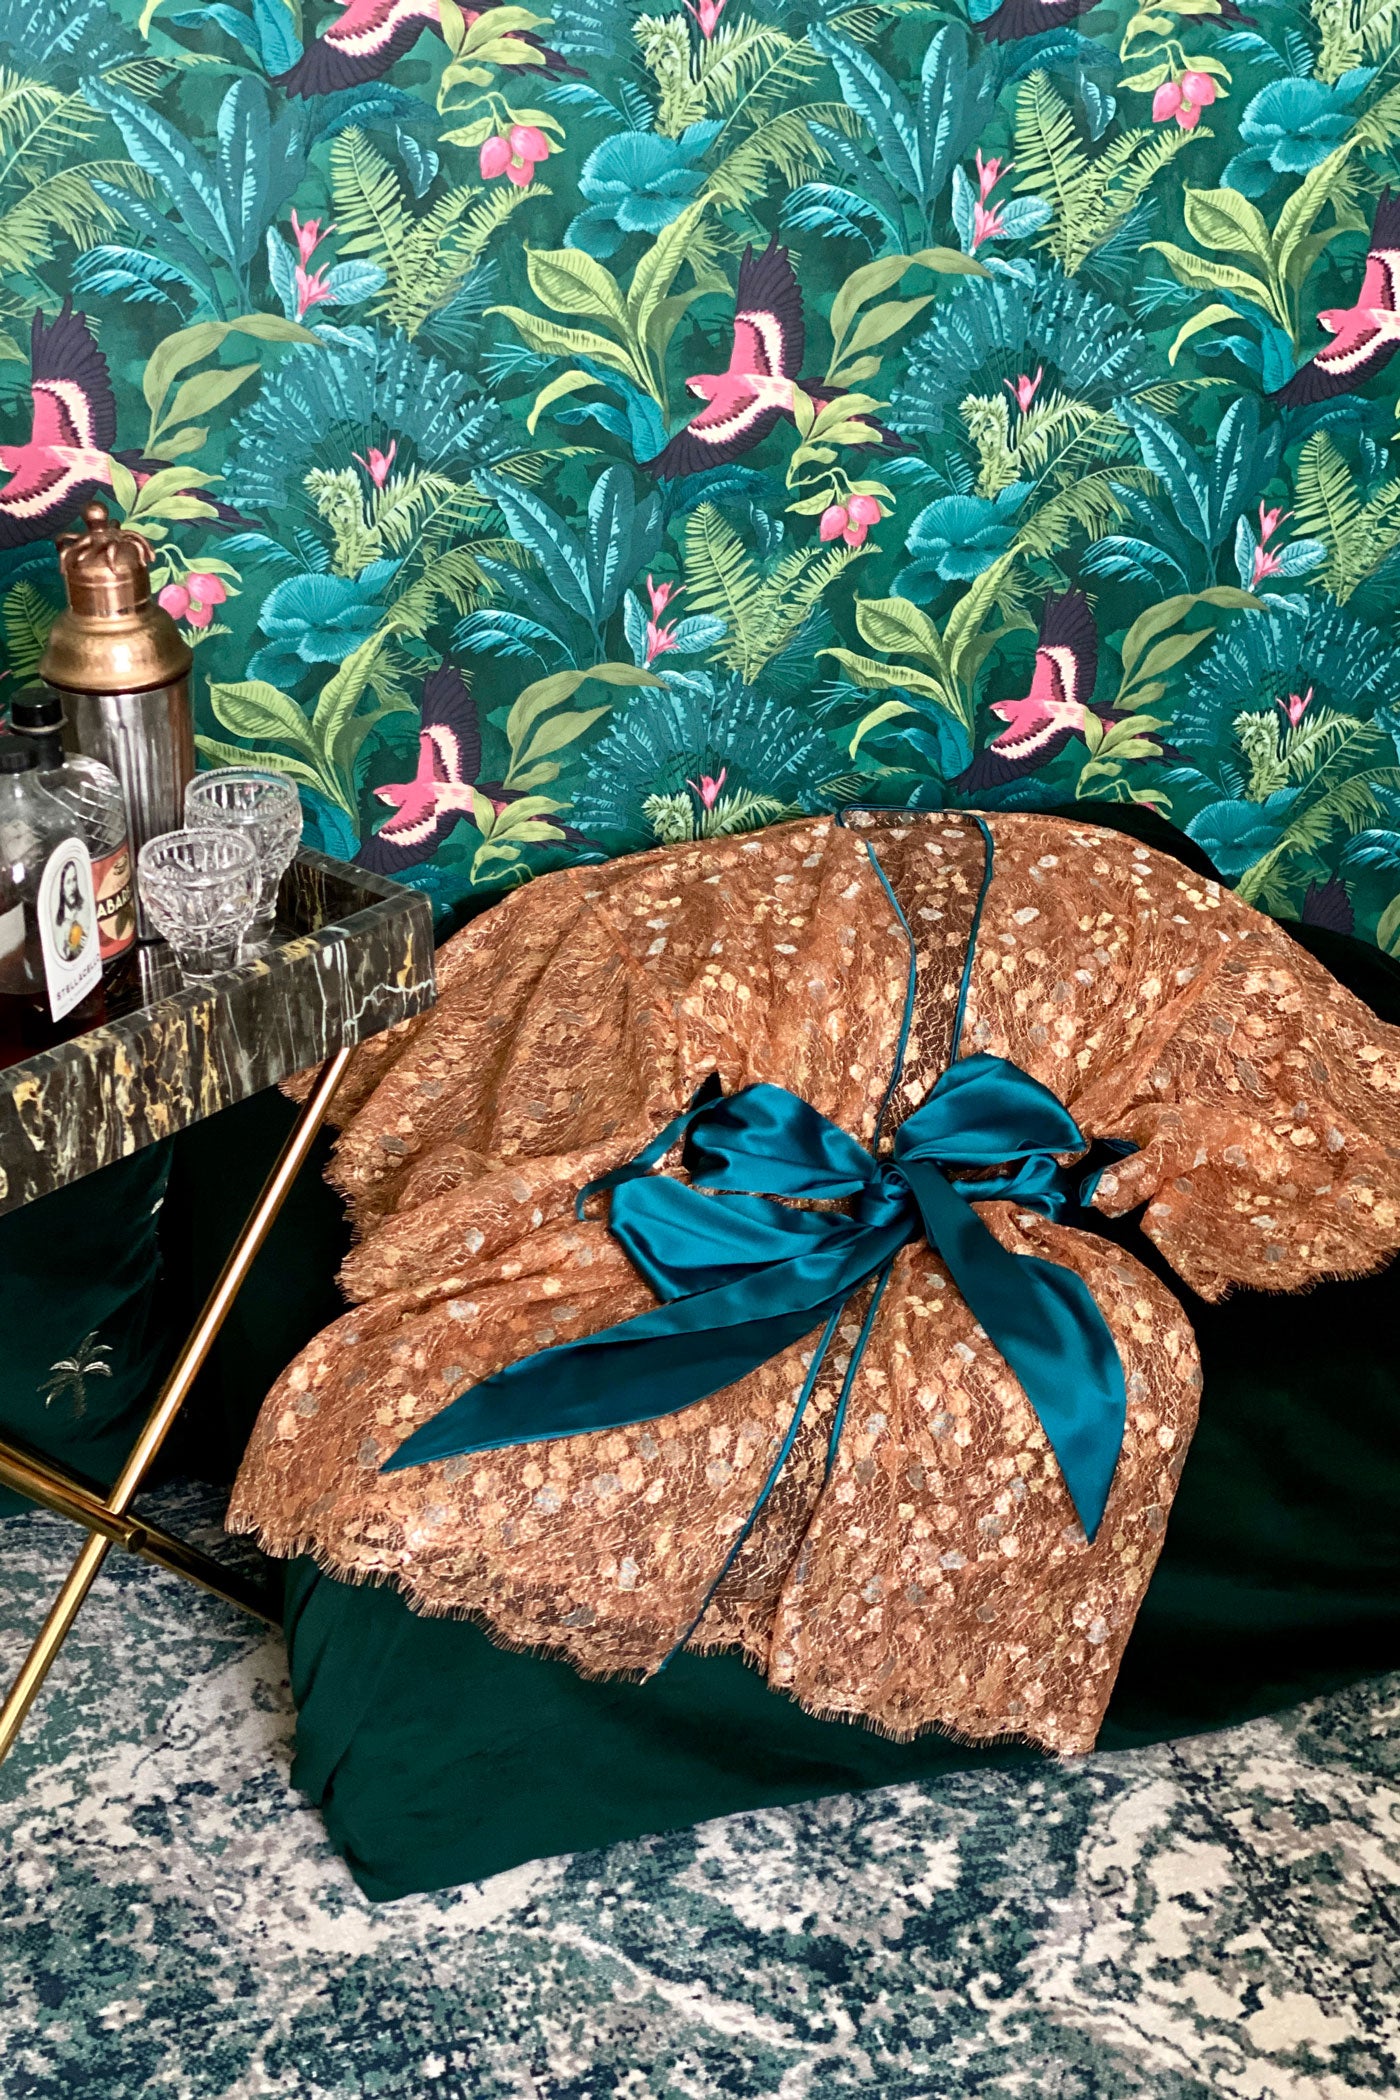 Metallic gold lace robe with turquoise silk sash flatlay against lush wallpaper and cocktails